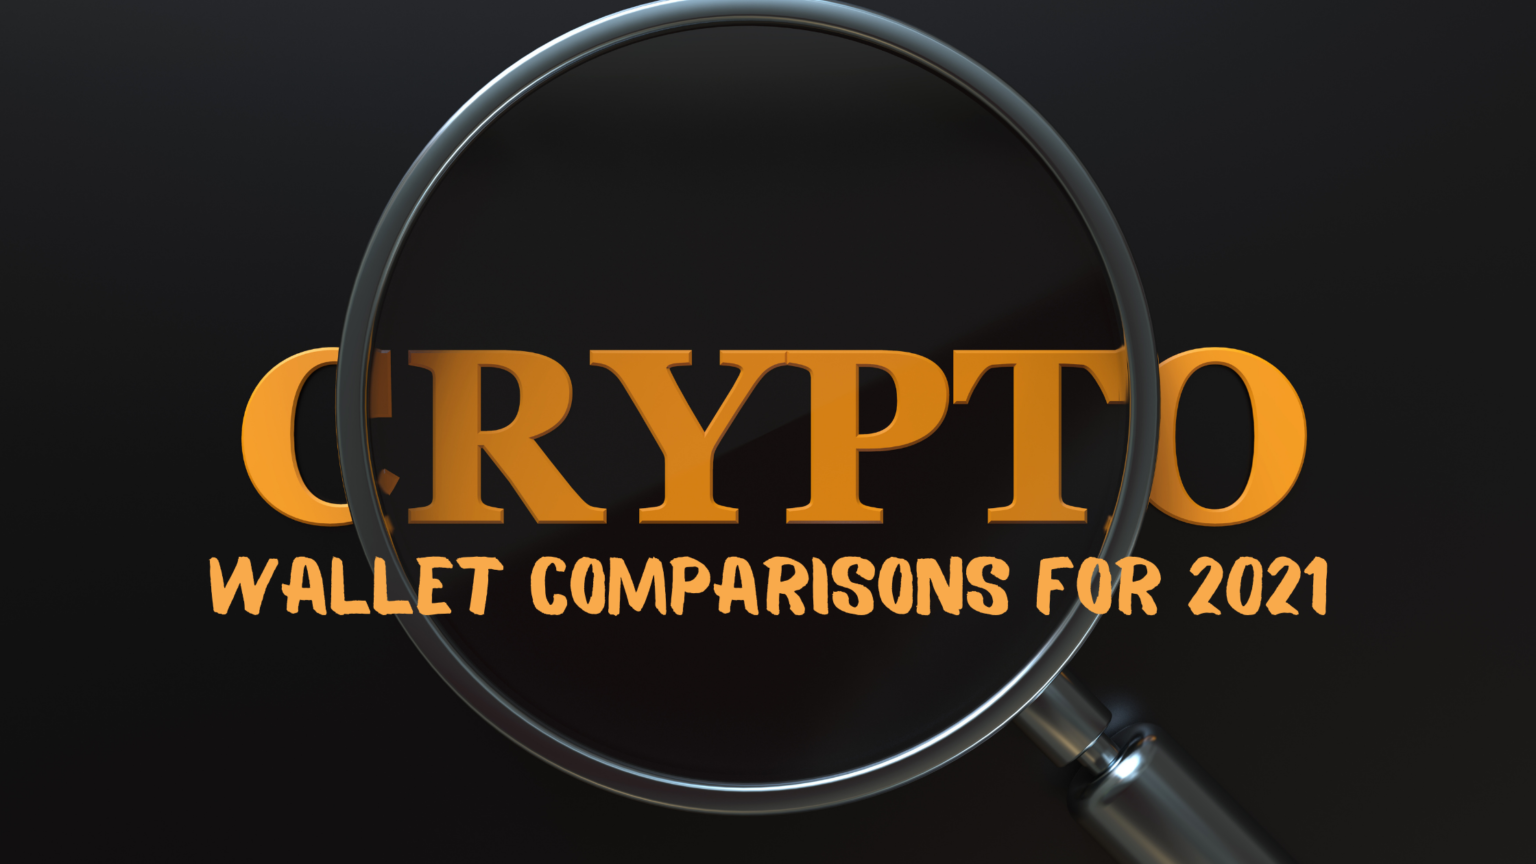 Crypto Wallet Comparisons For 2021 | CryptoMarketeer